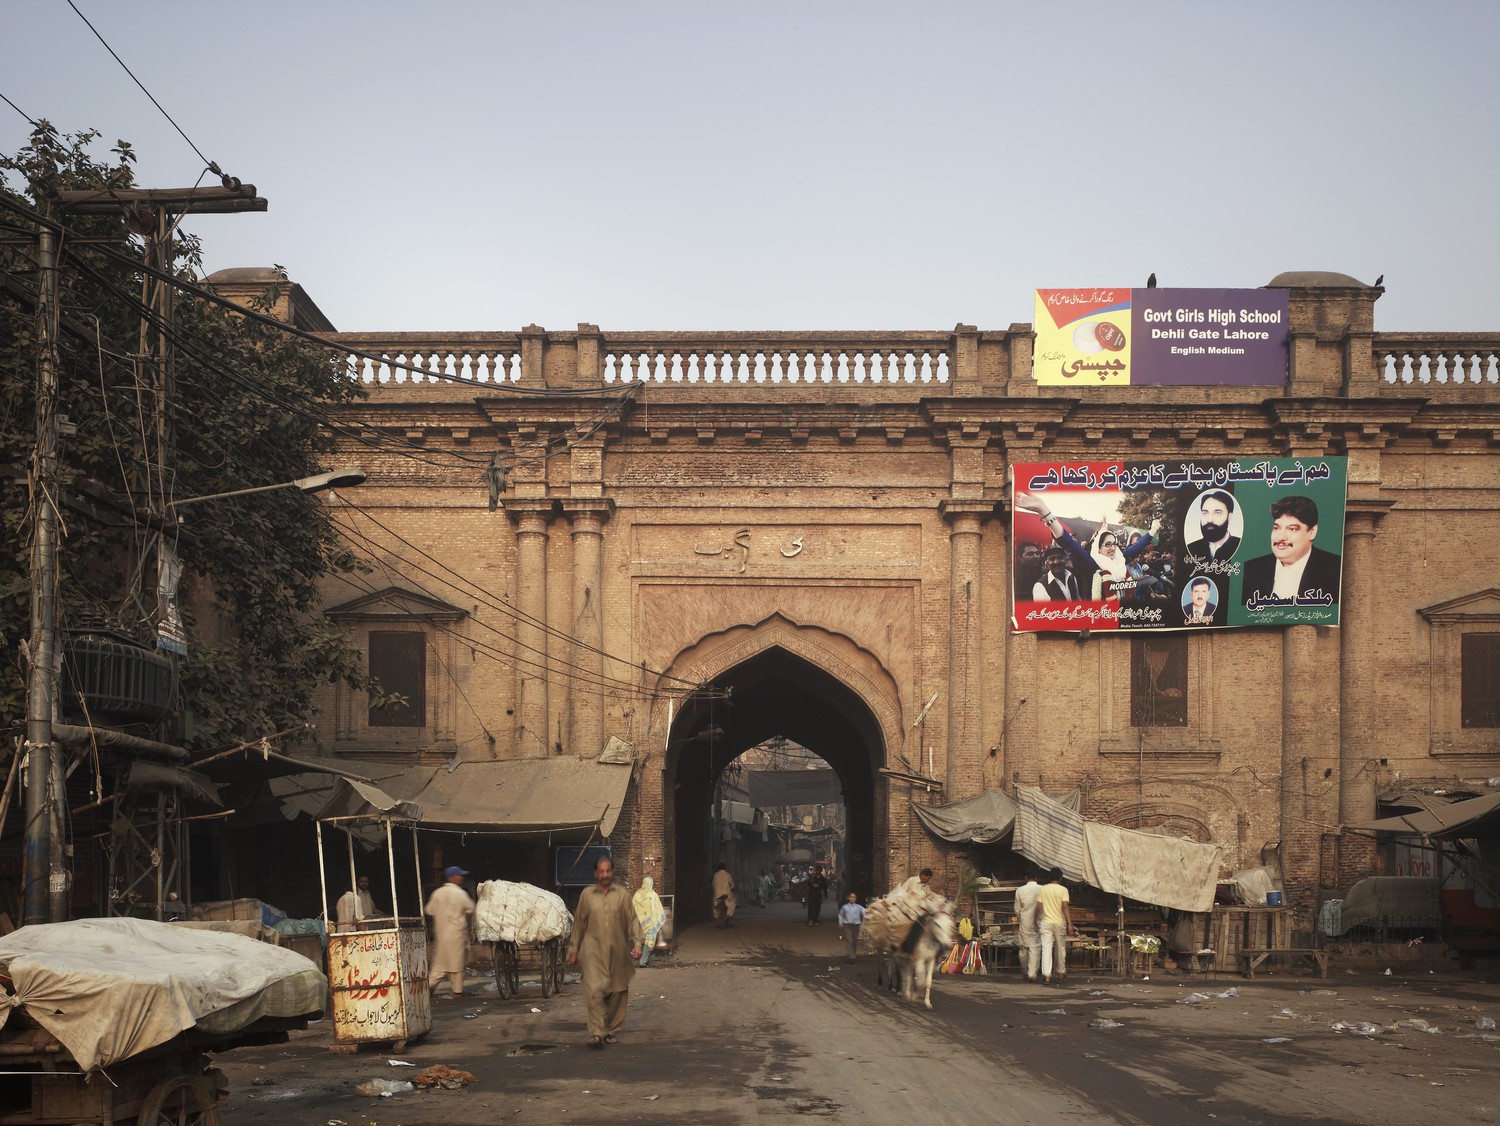 Lahore Walled City Urban Regeneration Project - Delhi Gate, entrance to the Walled City